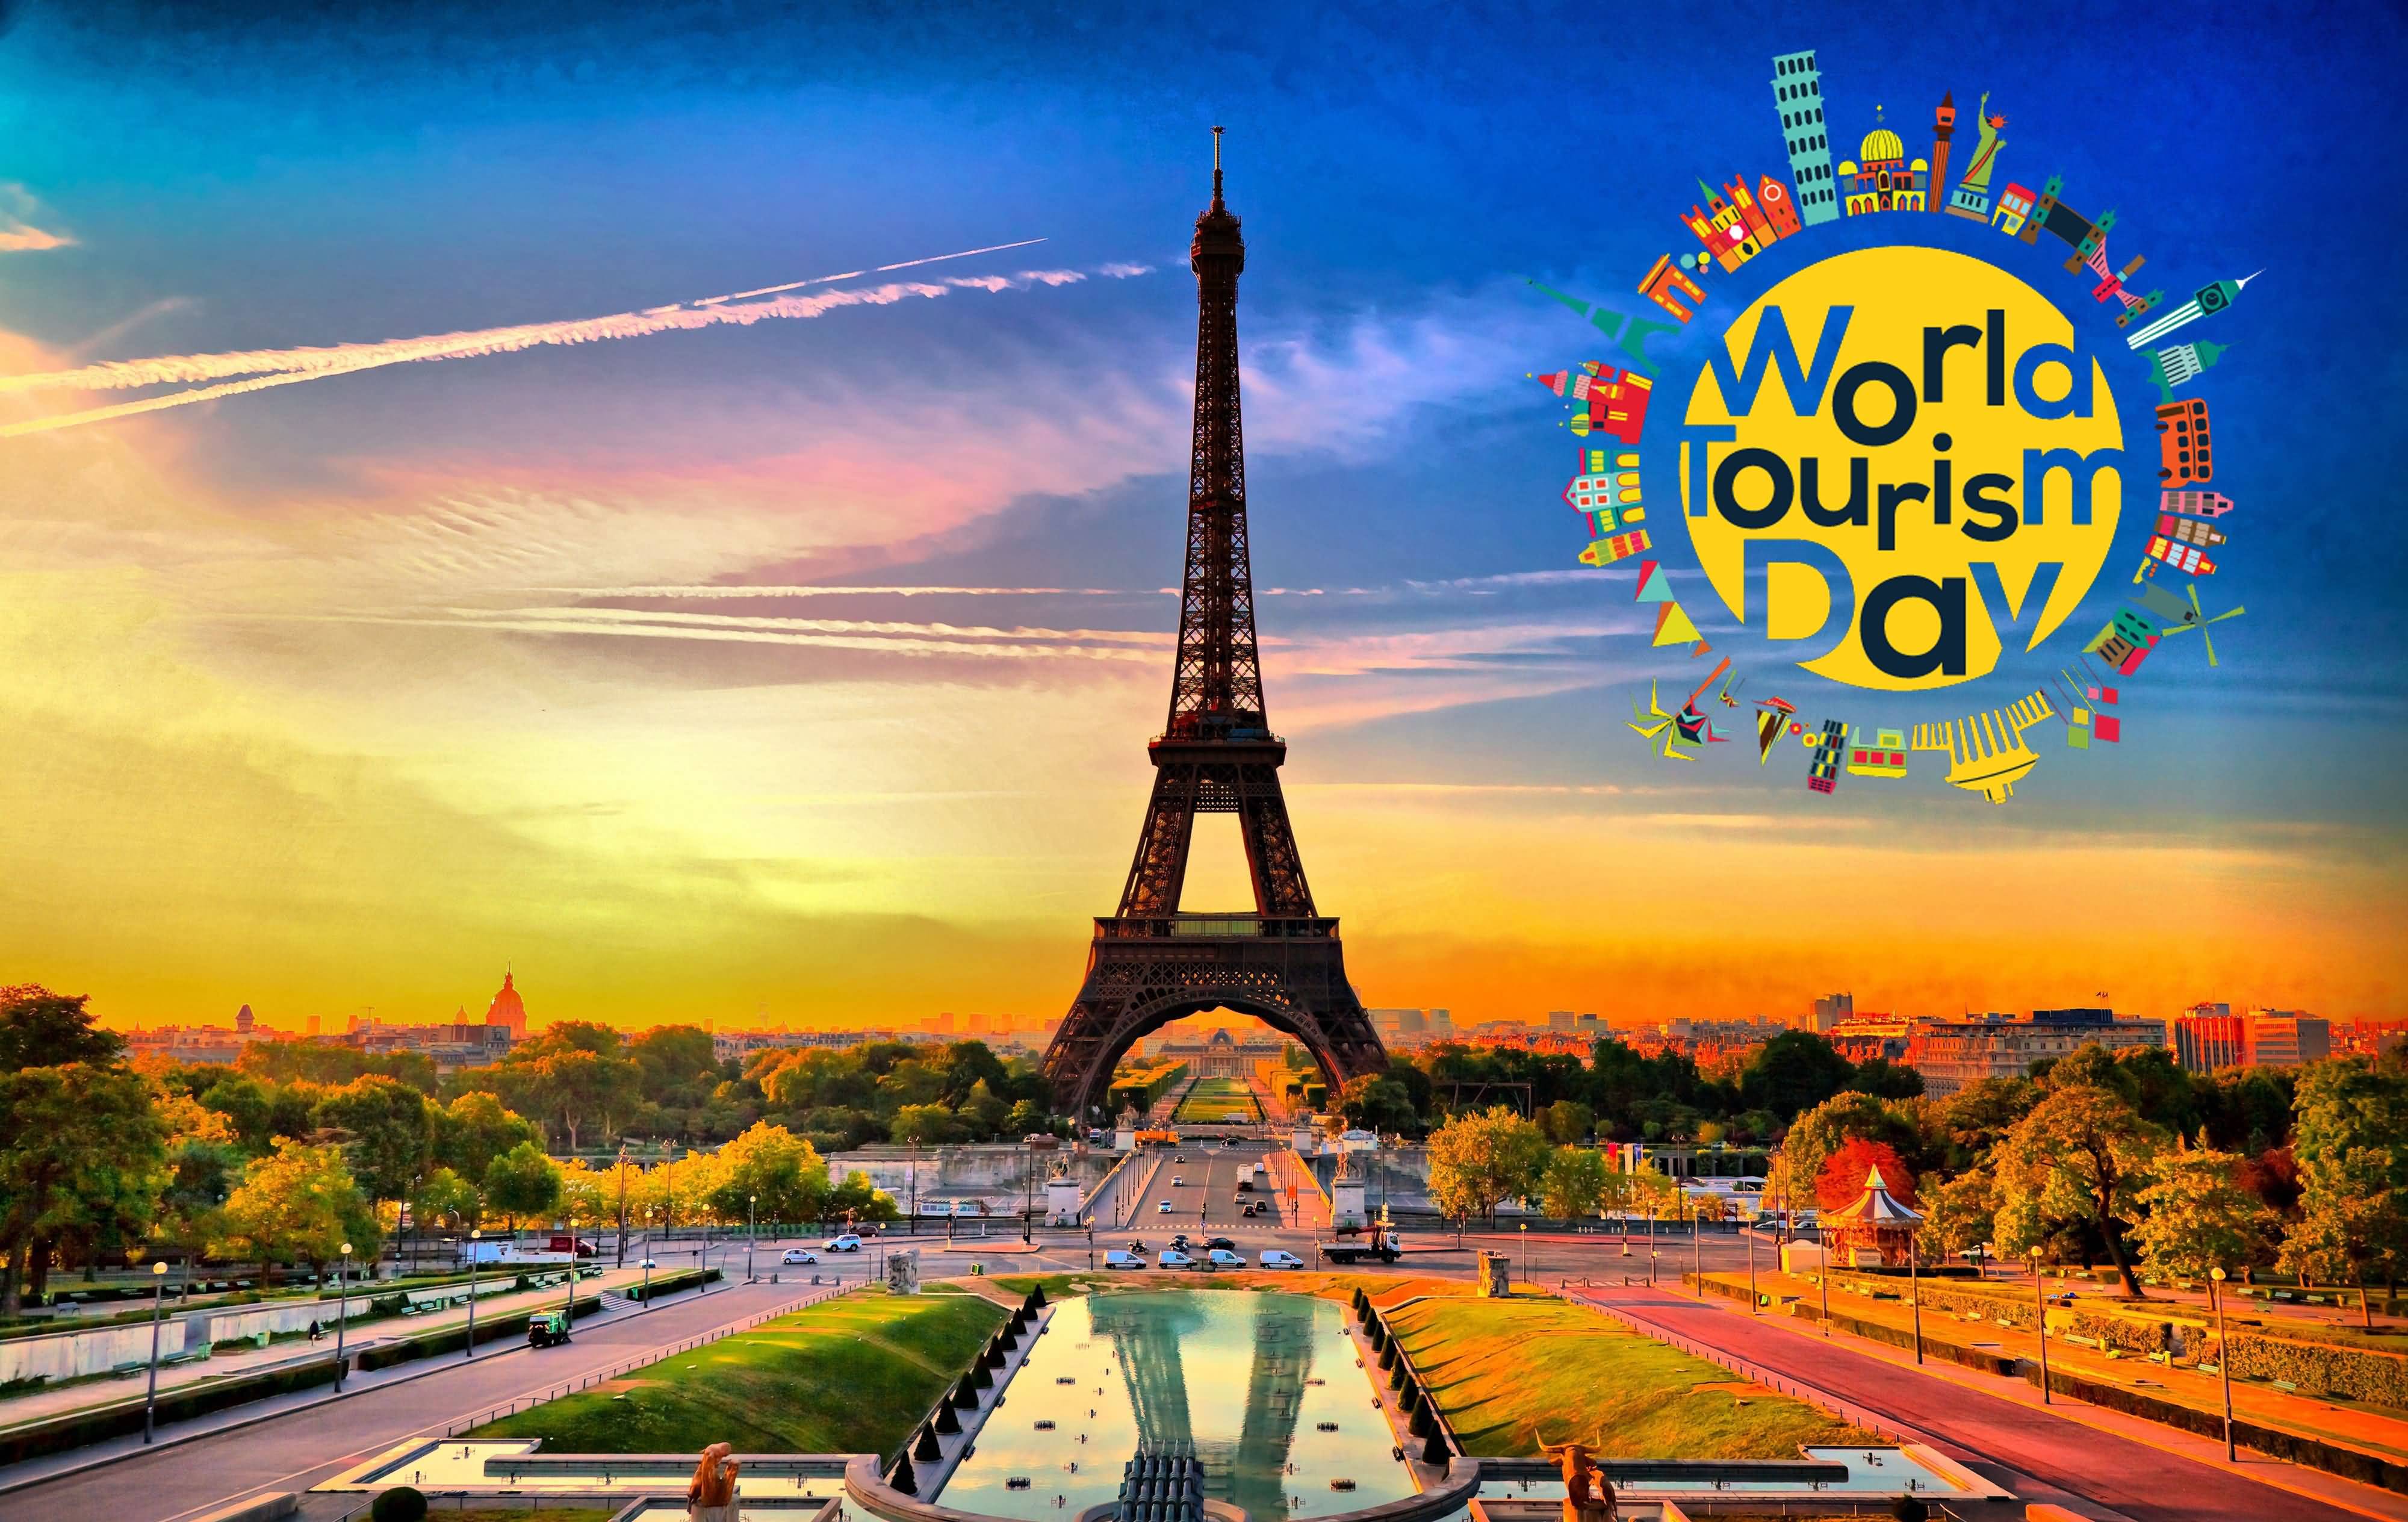 World Tourism Day Eiffel Tower Amazing Picture In Background